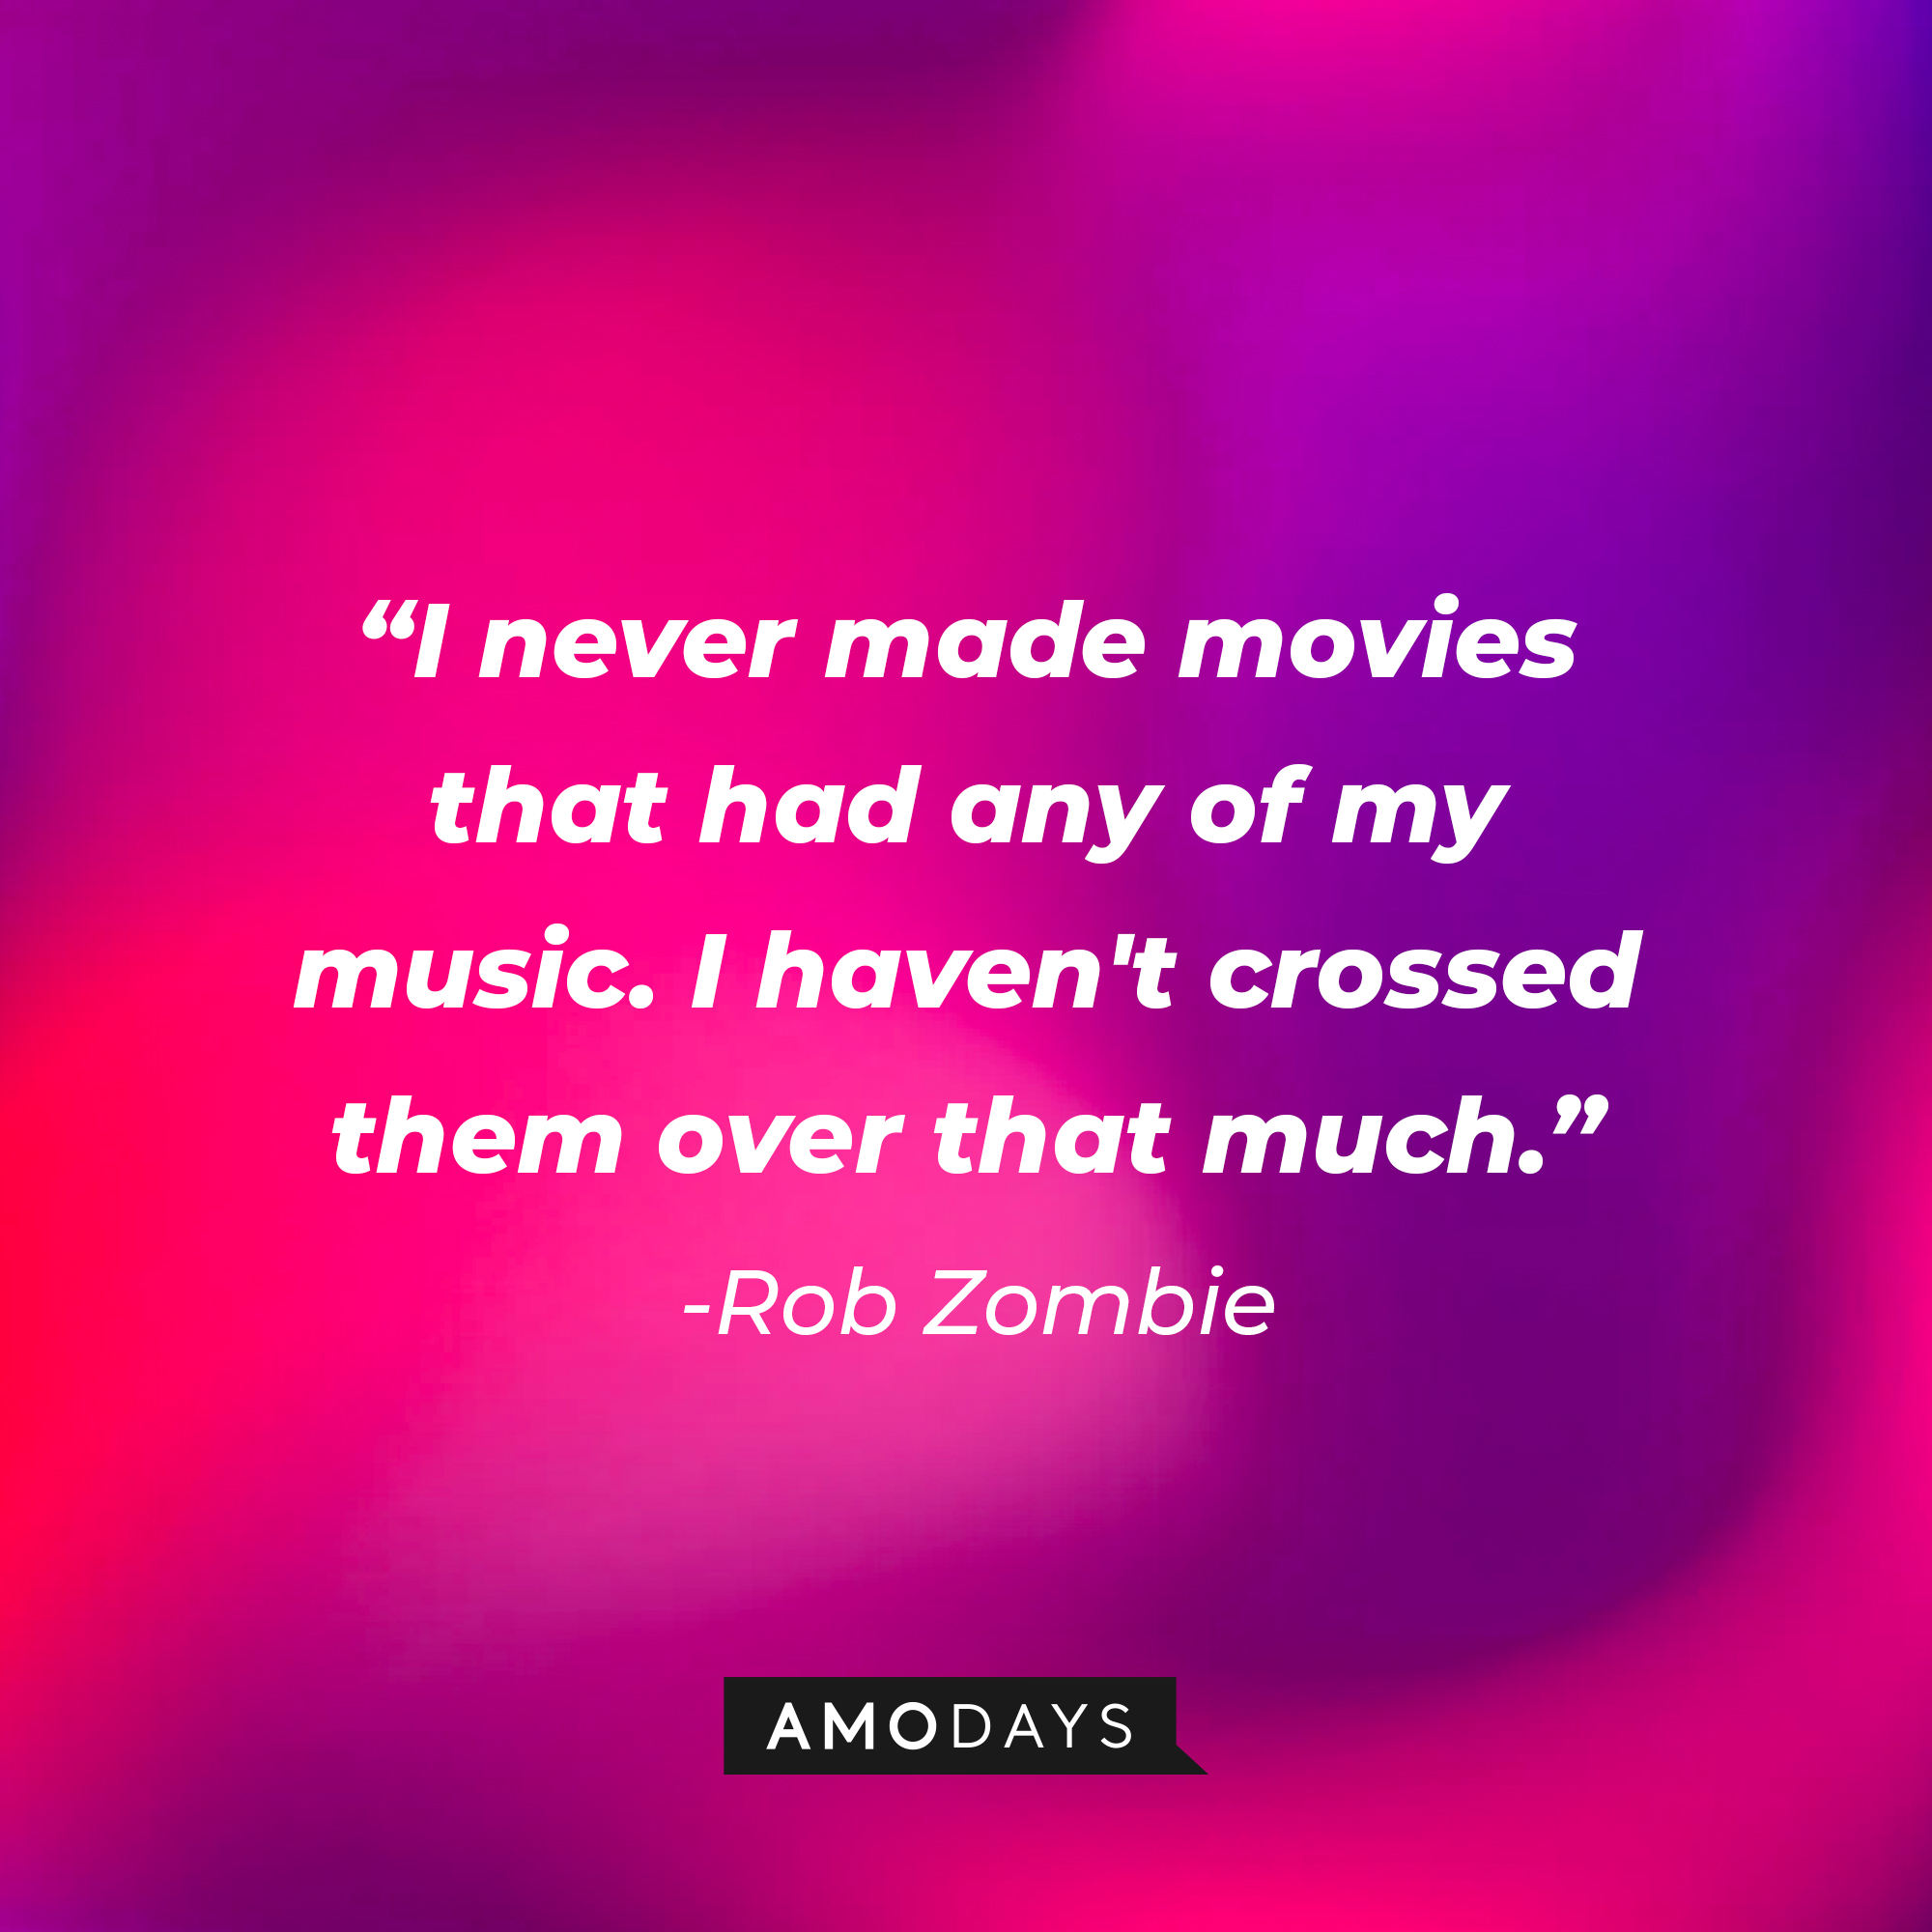 Rob Zombie's quote "I never made movies that had any of my music. I haven't crossed them over that much." | Source: AmoDays